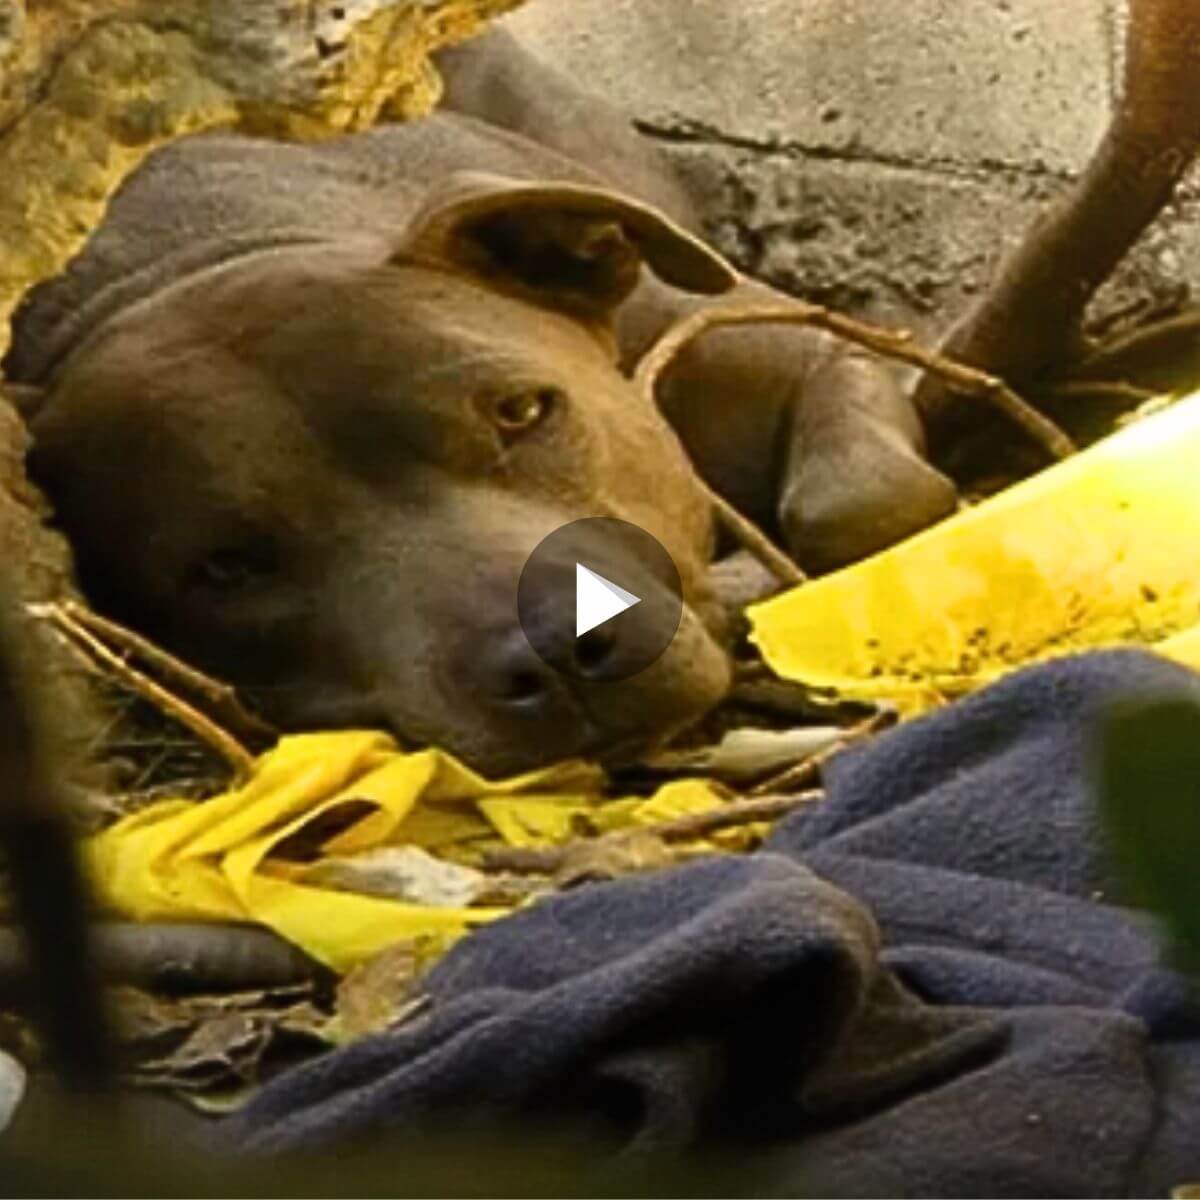 The Very Touching Rescue of a Pit Bull Living in a Ditch